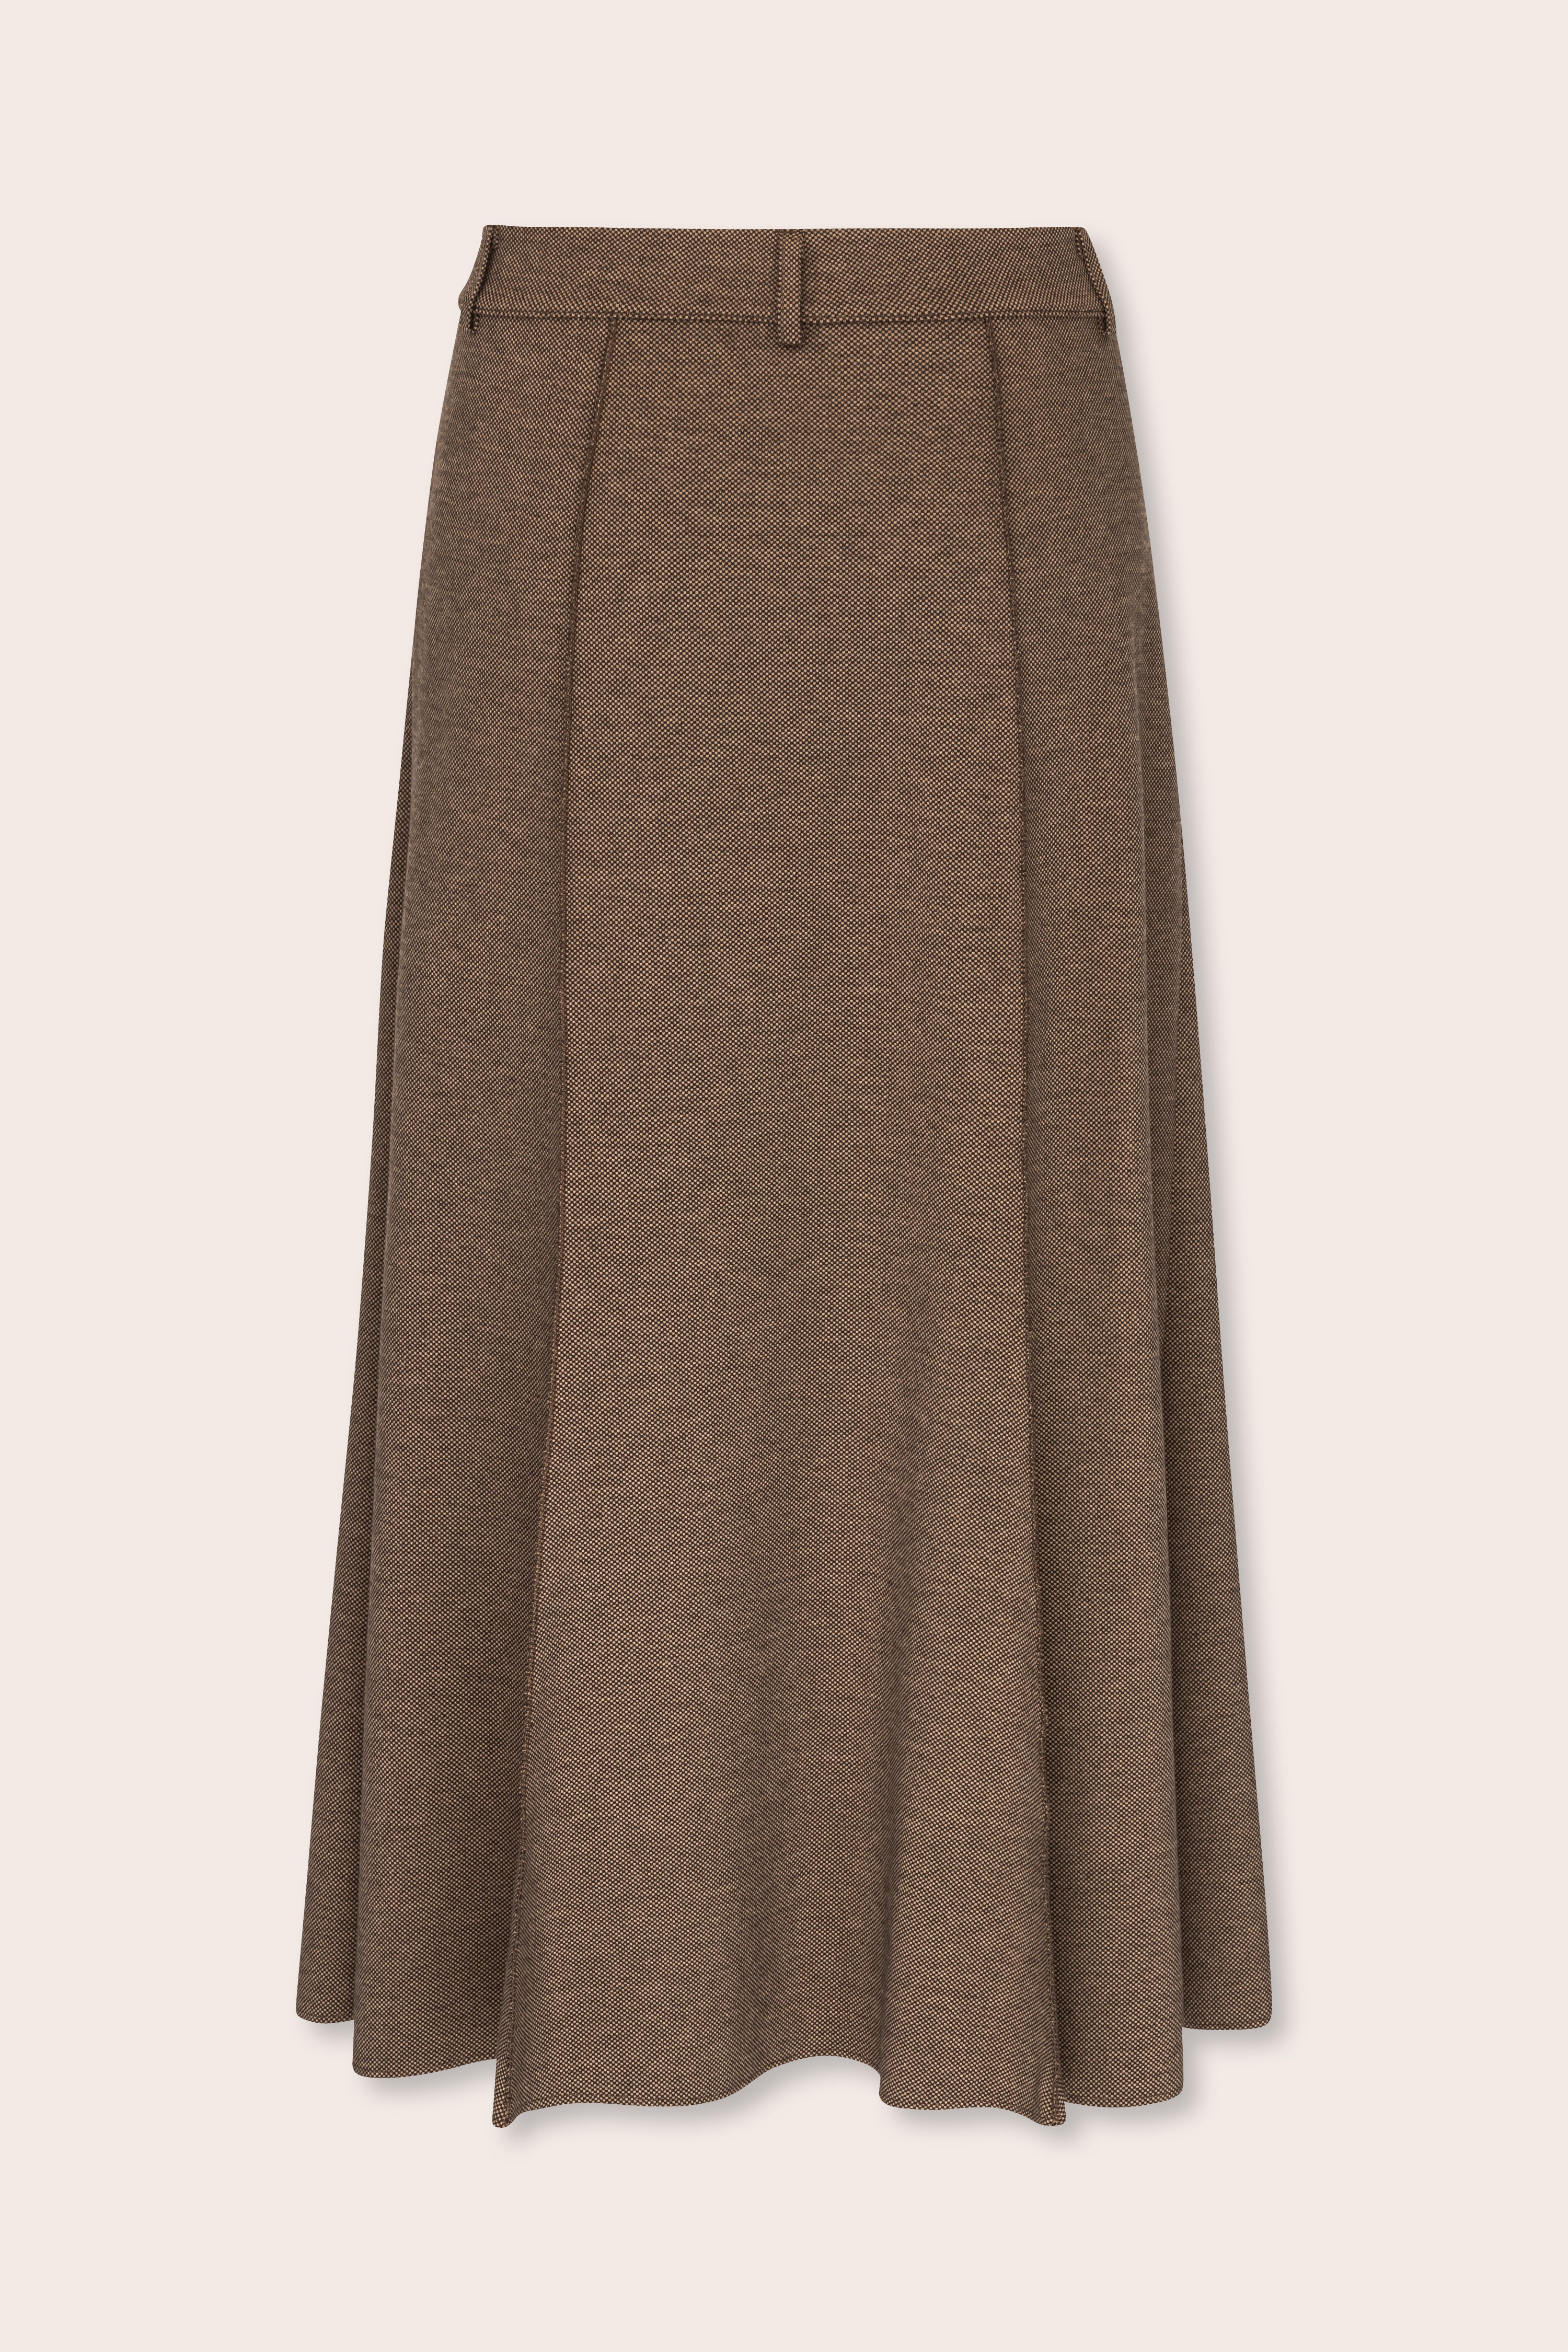 Jersey skirt with godet pleats